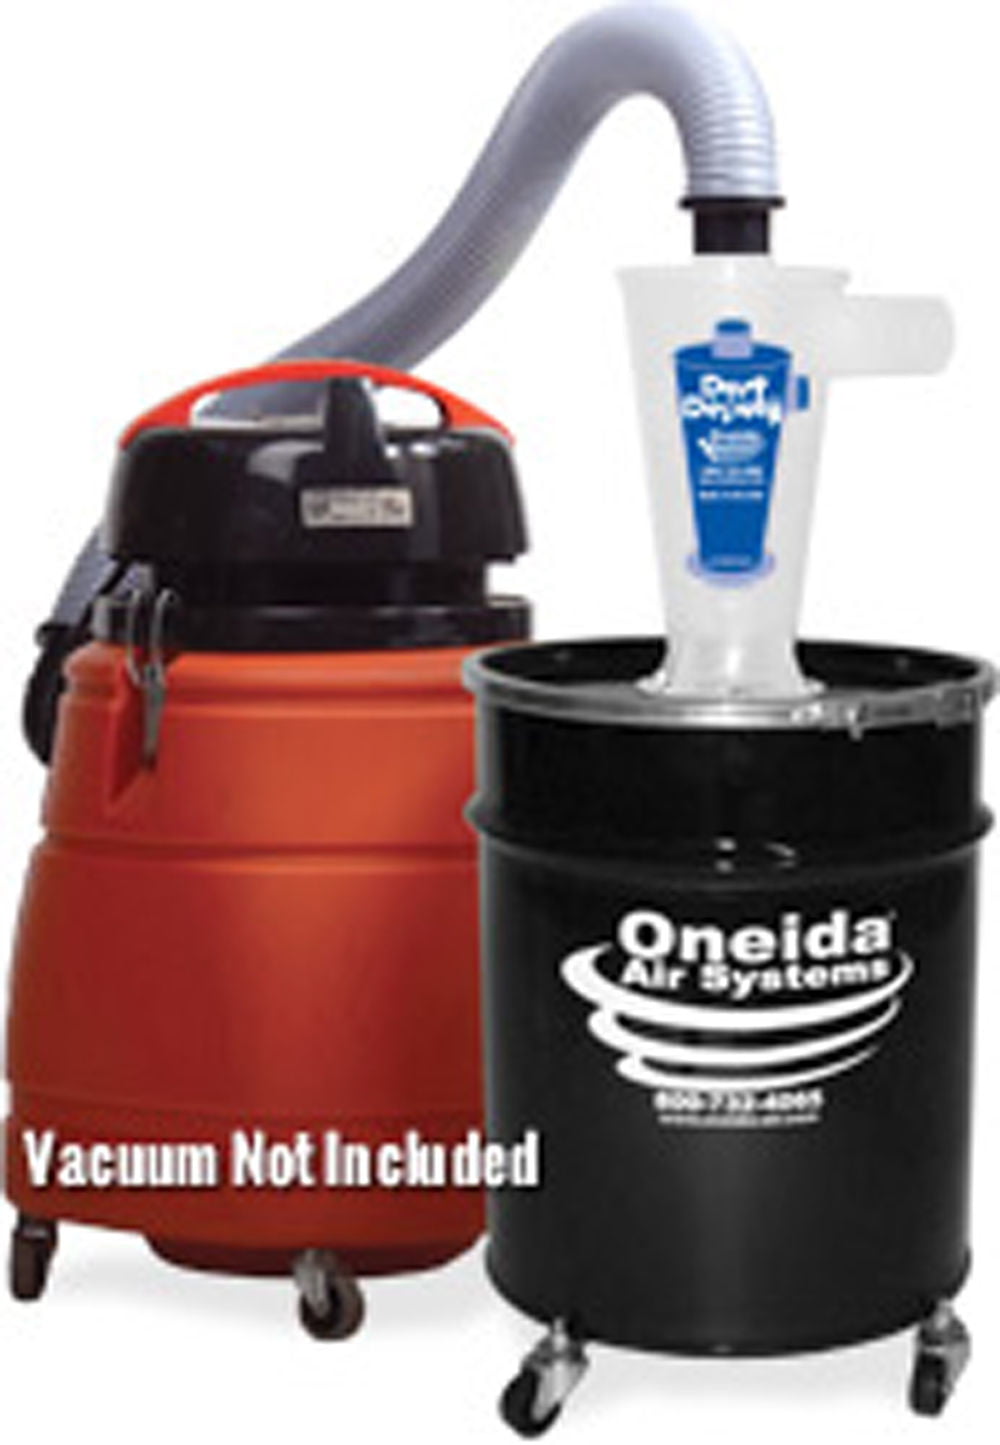 ONCCI Professional Filter Separator Cyclone Dust Collector Extractor/Vacuum 